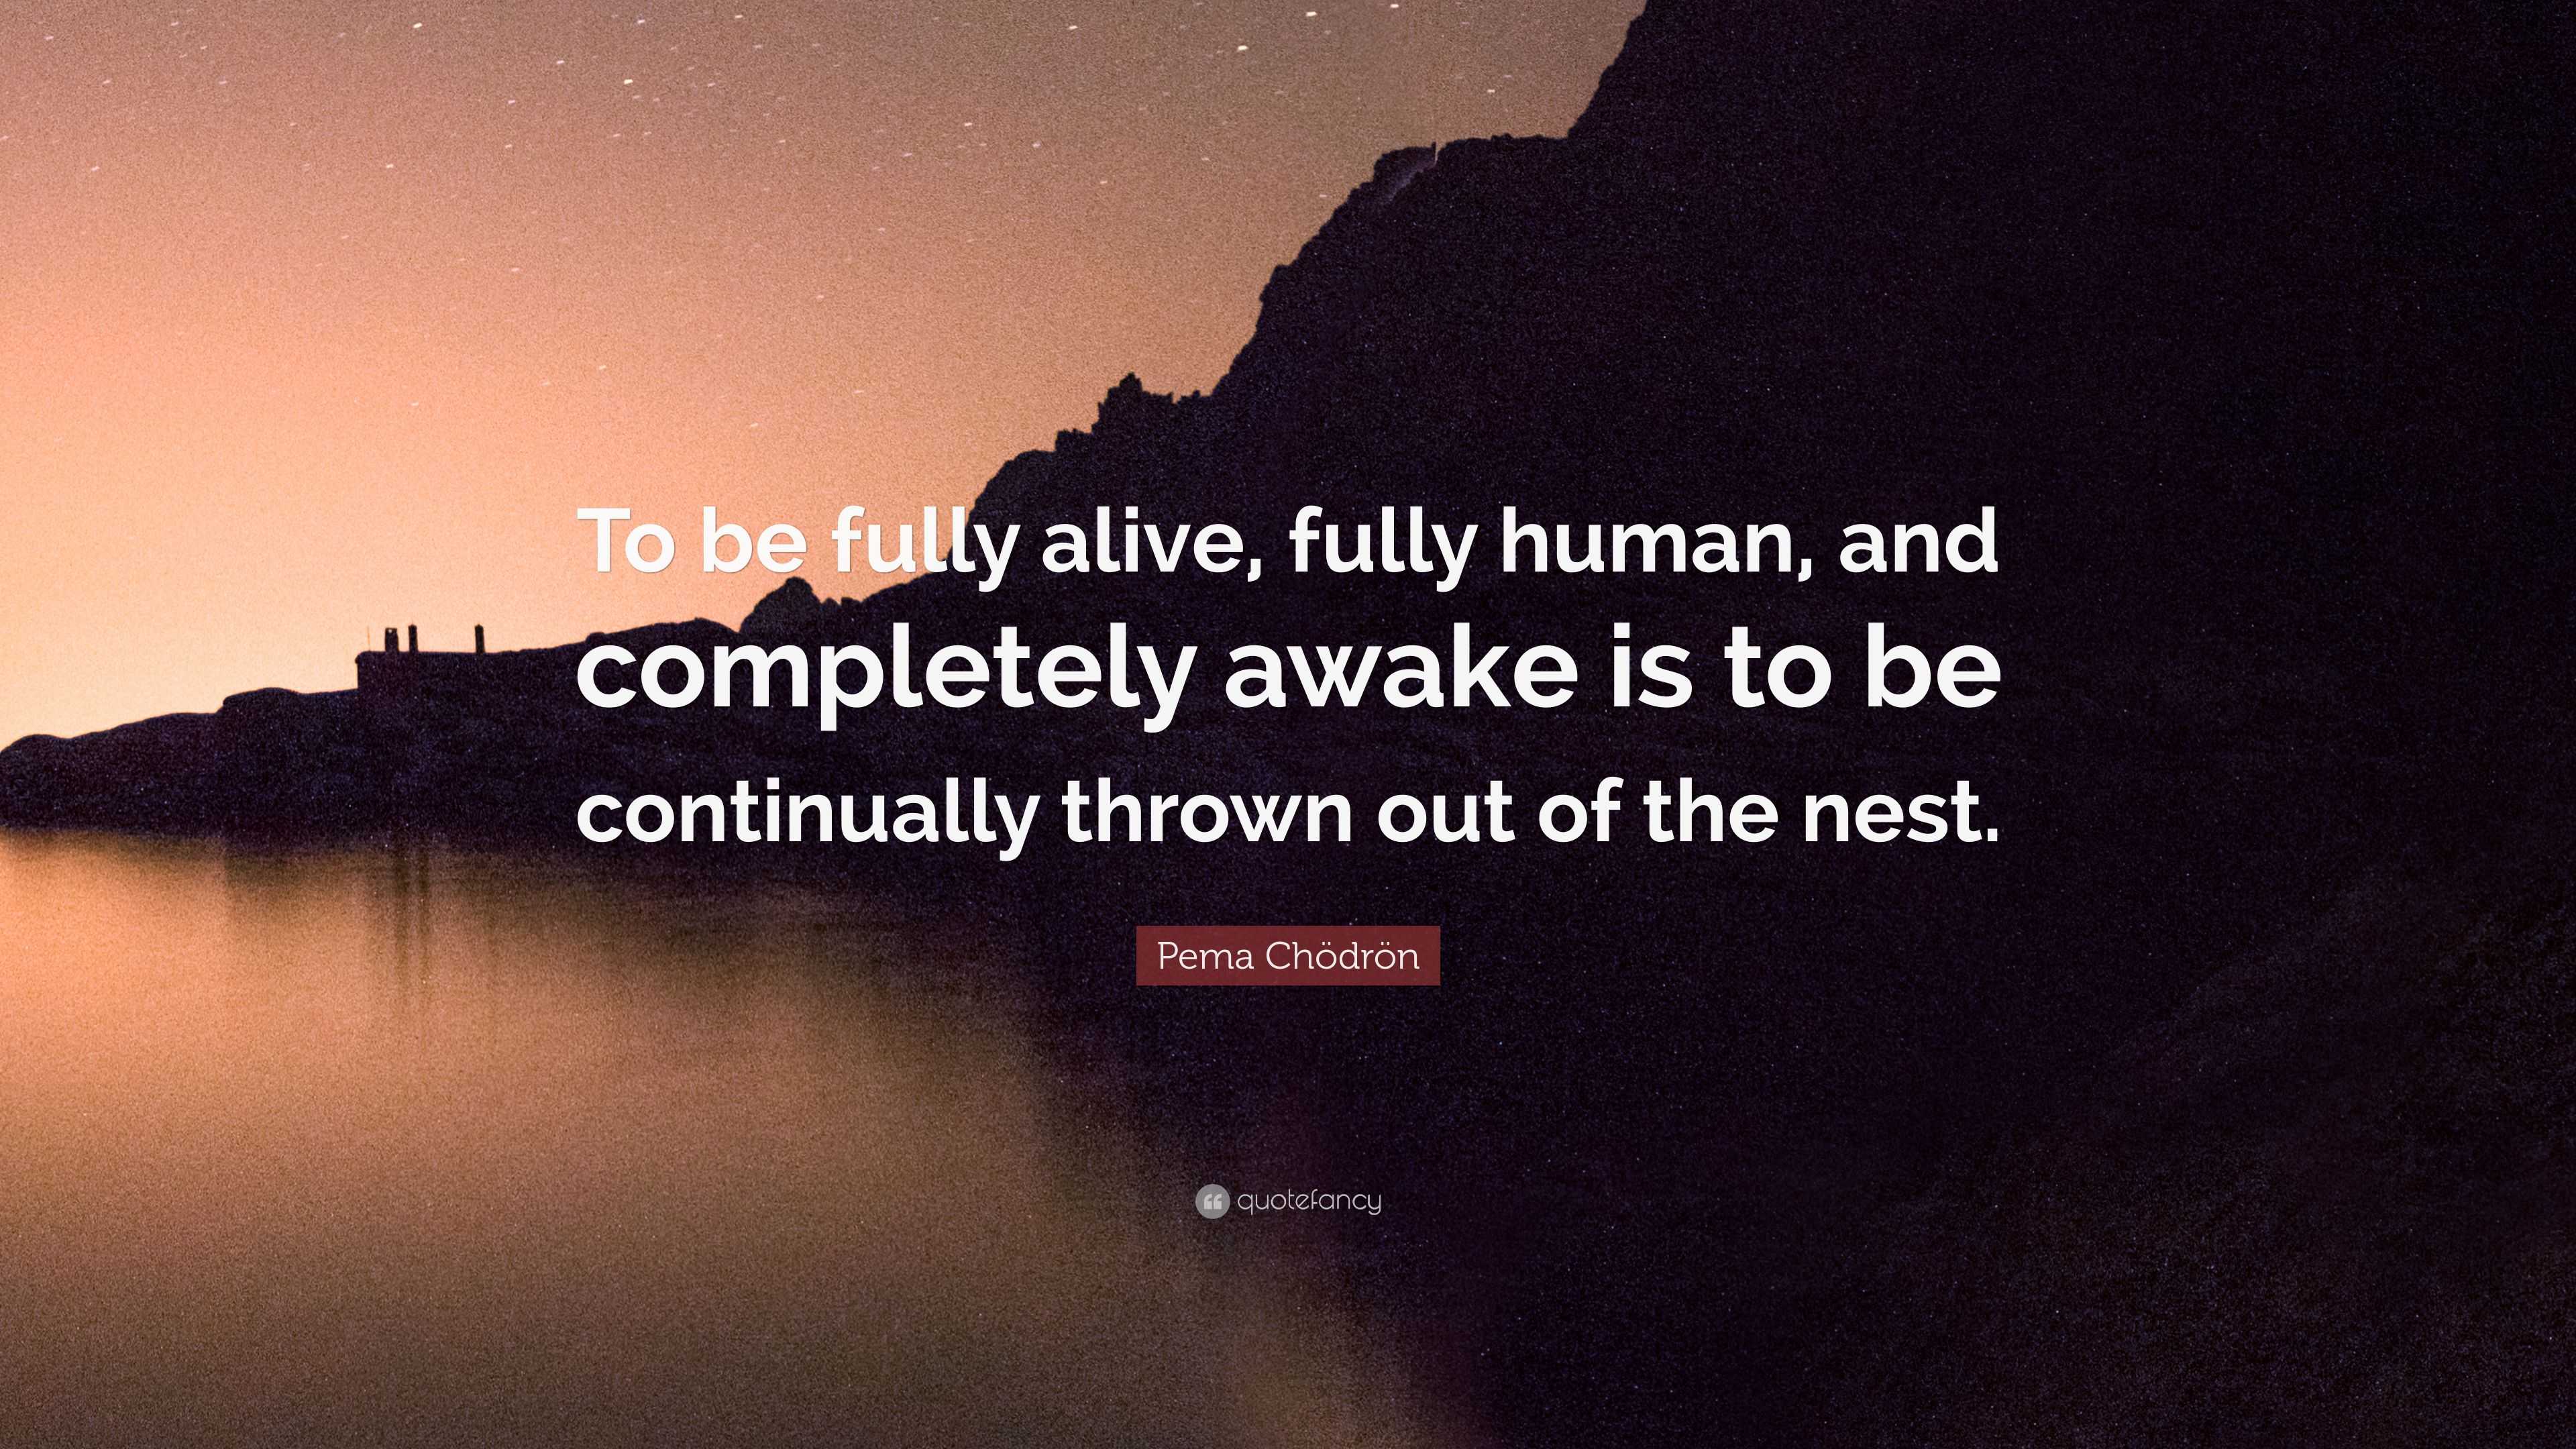 Pema Chödrön Quote: “To be fully alive, fully human, and completely ...